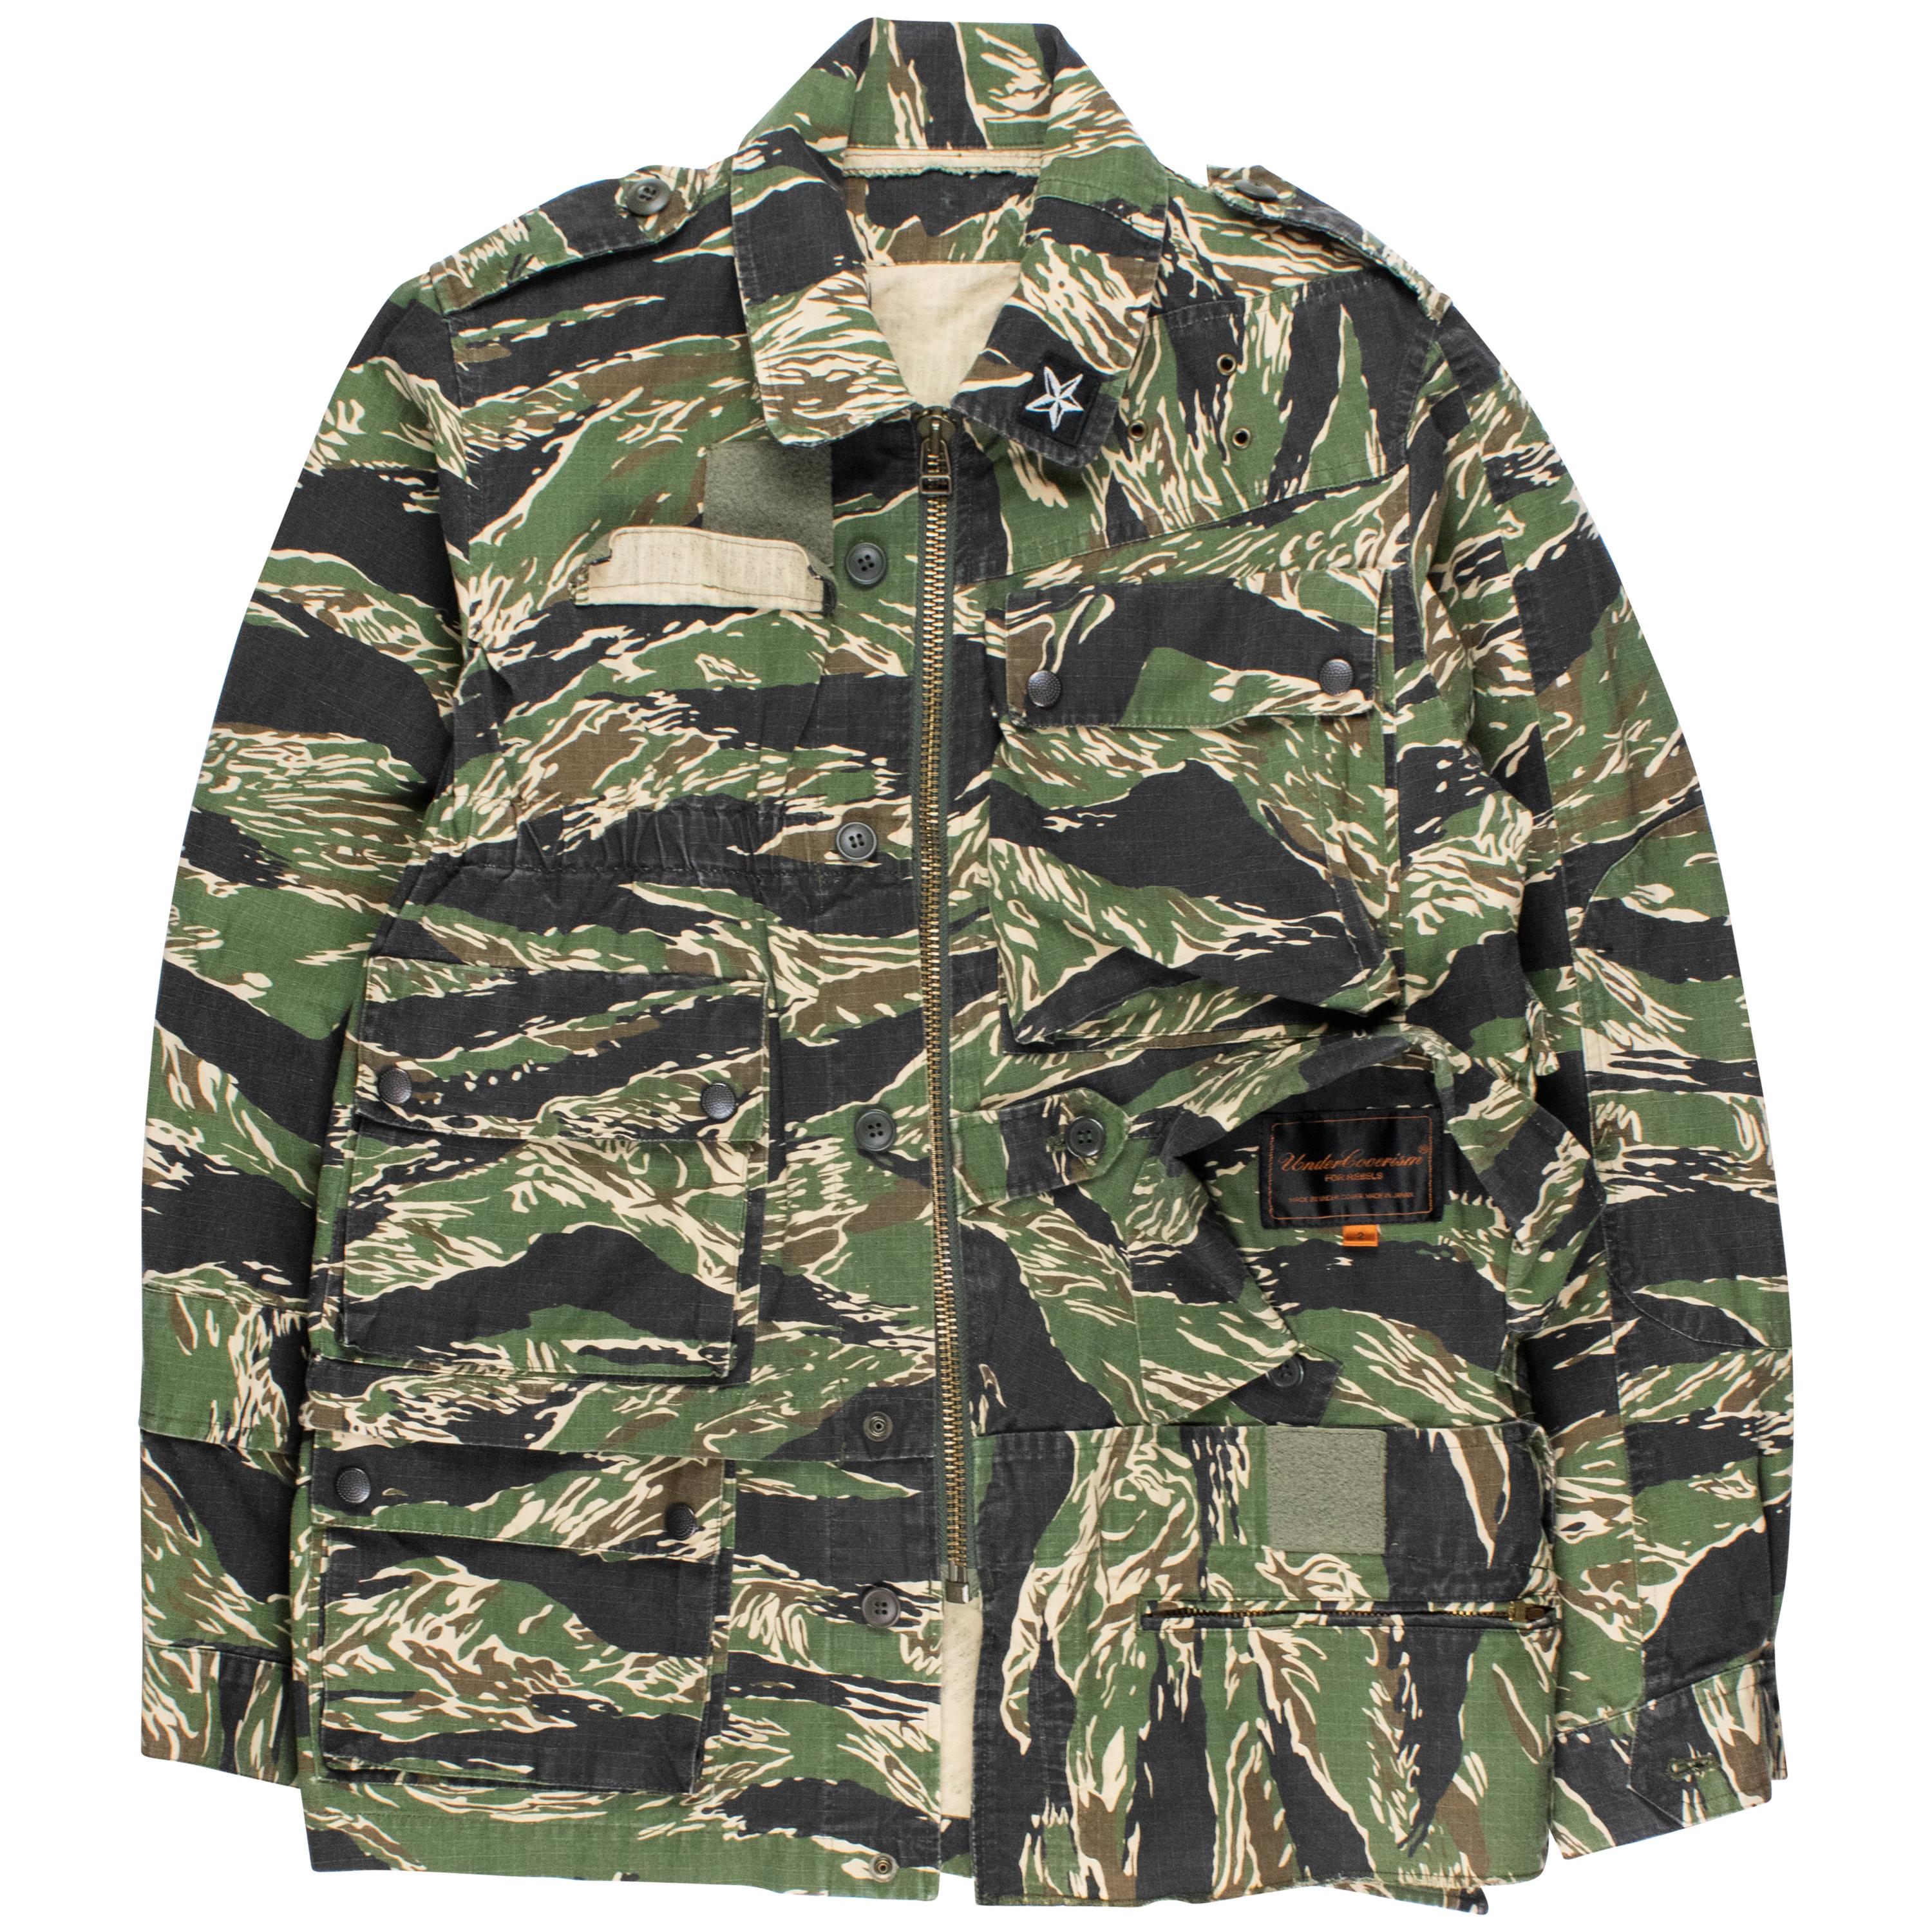 Undercover SS2005 Reconstructed M-65 Jacket